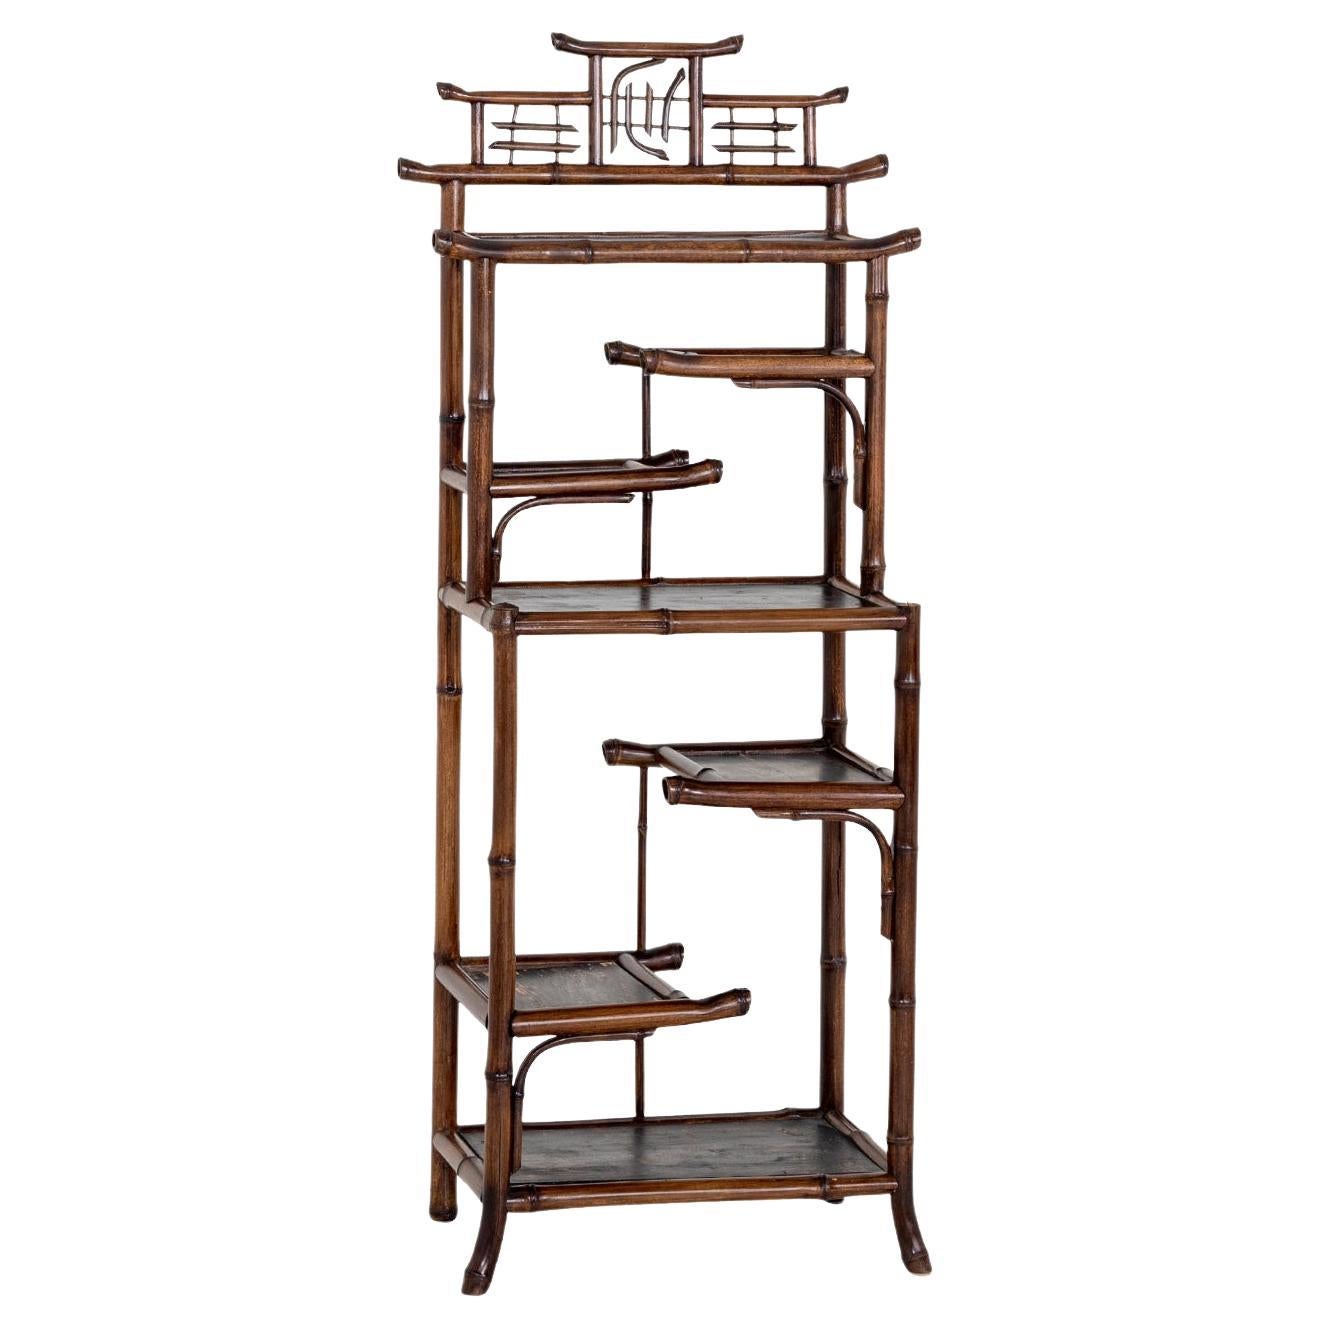 20th Century French Bamboo Book Shelving - Vintage Wall Rack, Unit